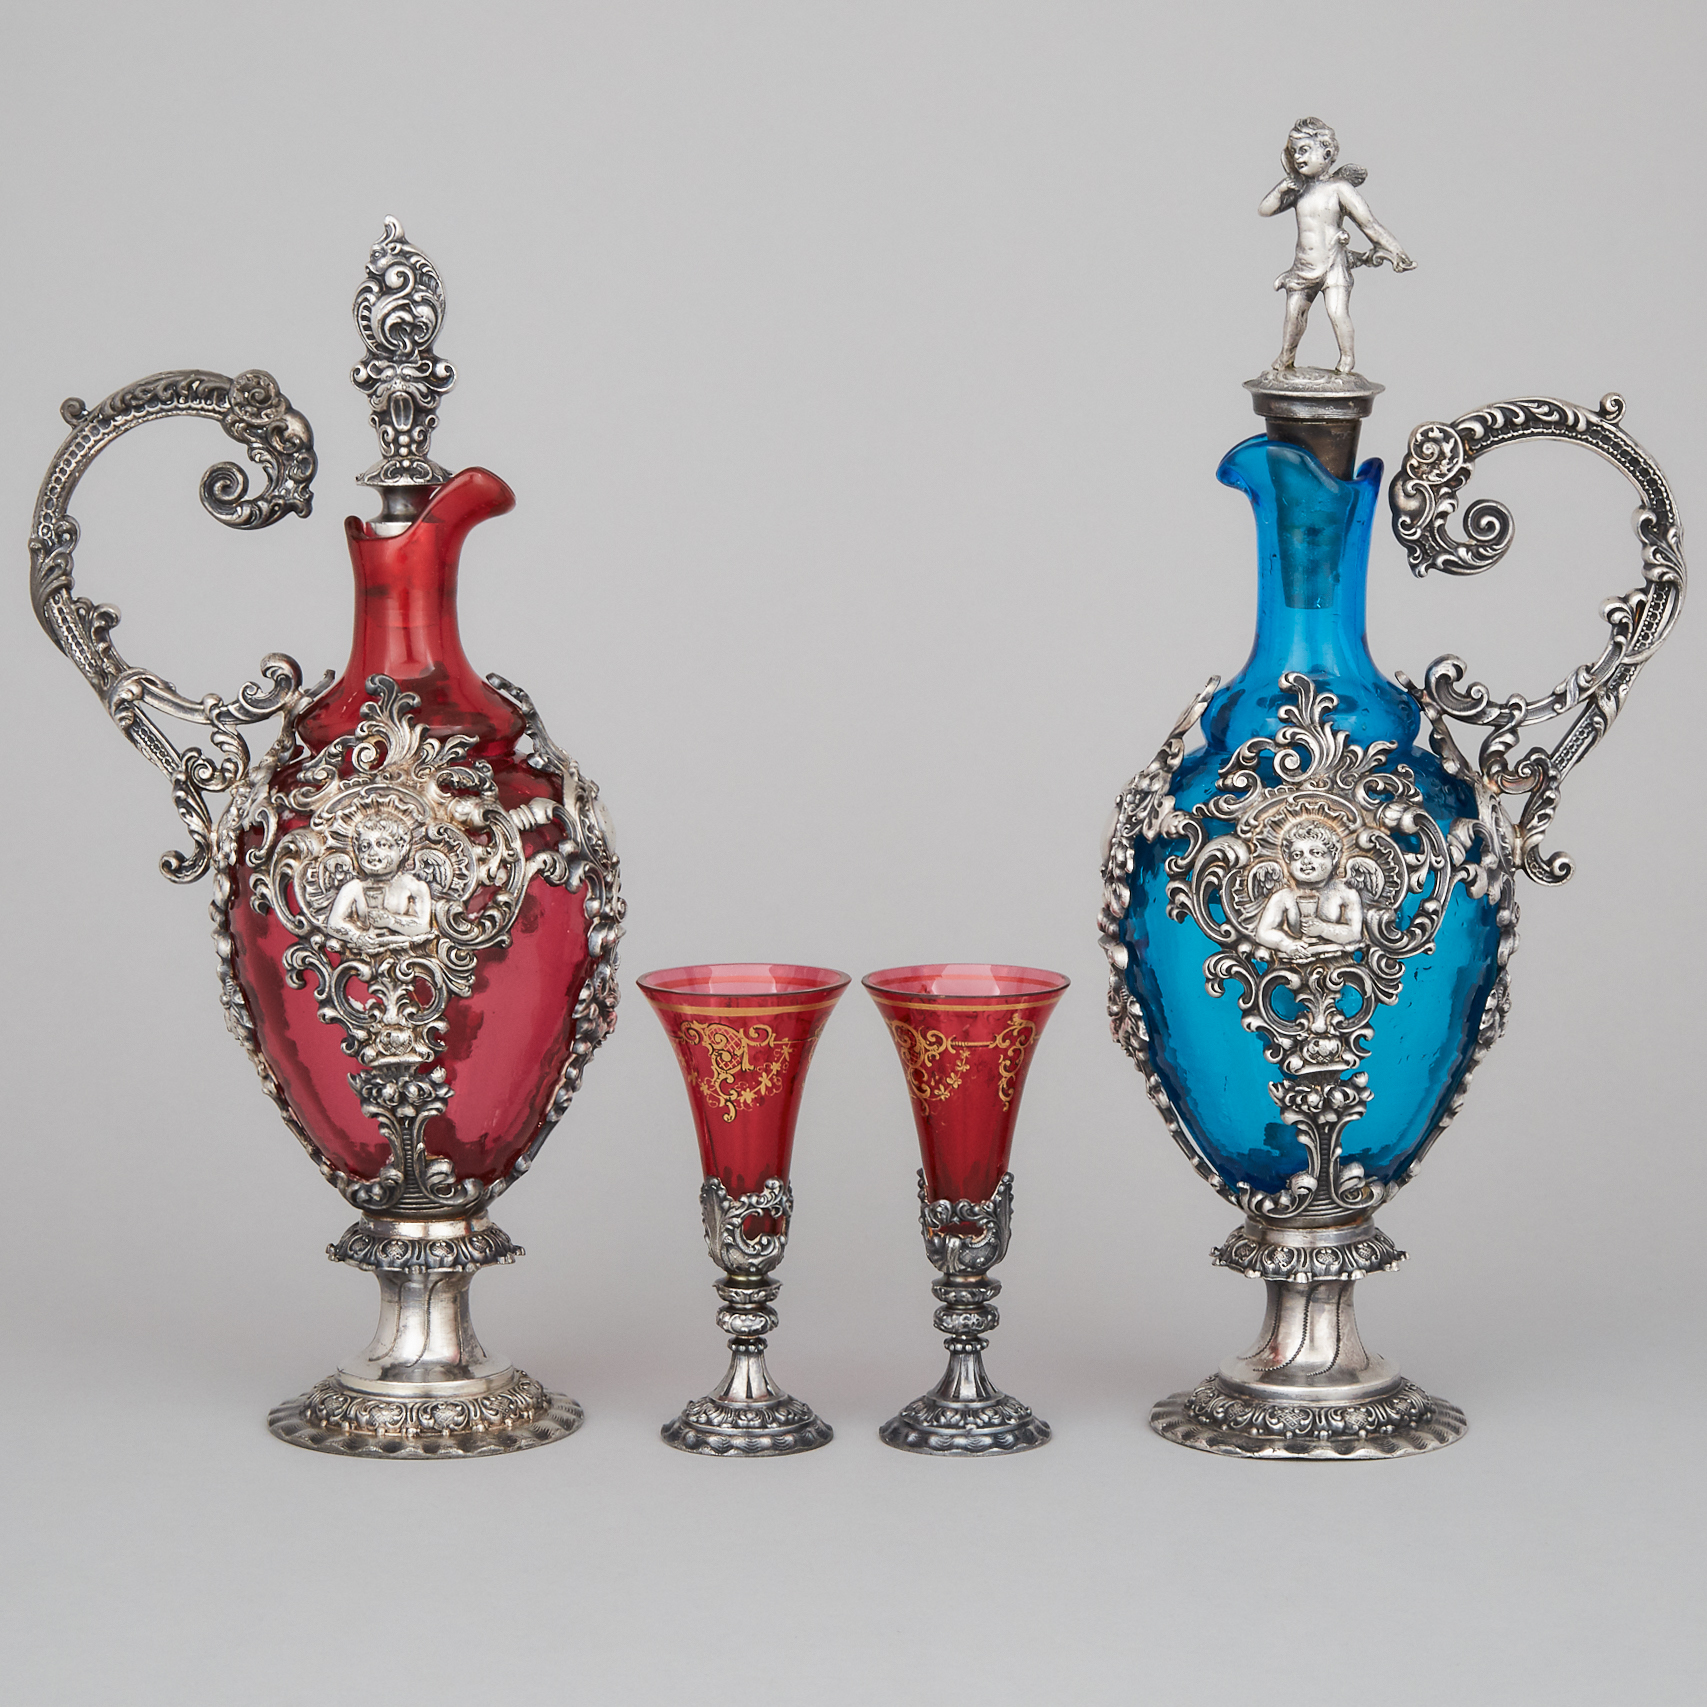 Two German WMF Silver Plated and Coloured Glass Carafes and Two Glasses, c.1900